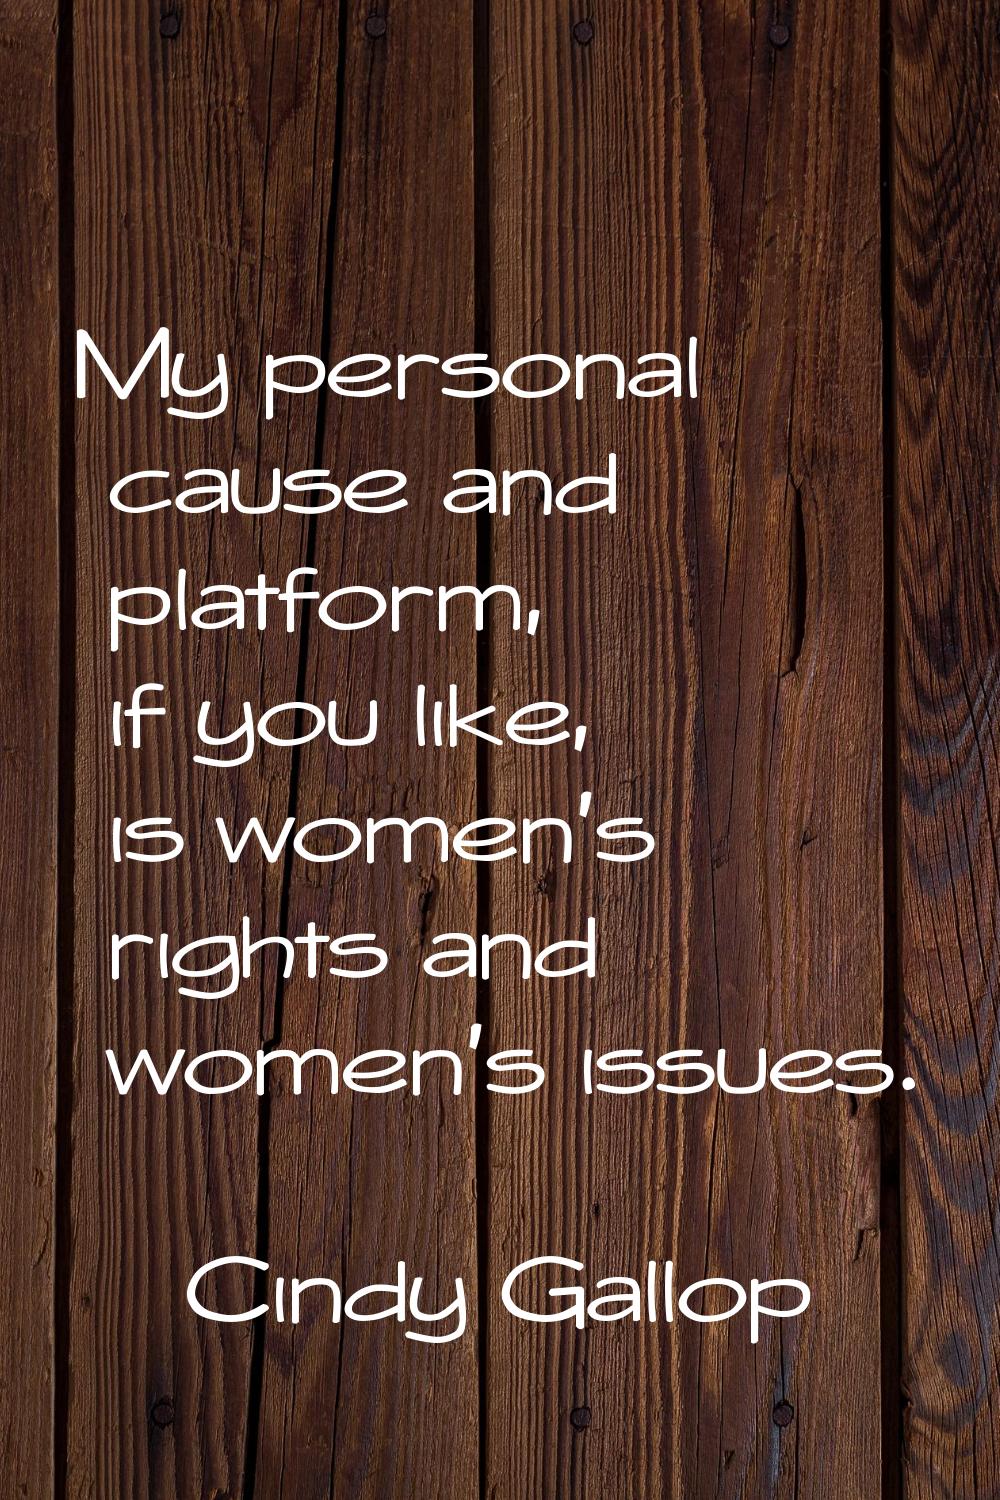 My personal cause and platform, if you like, is women's rights and women's issues.